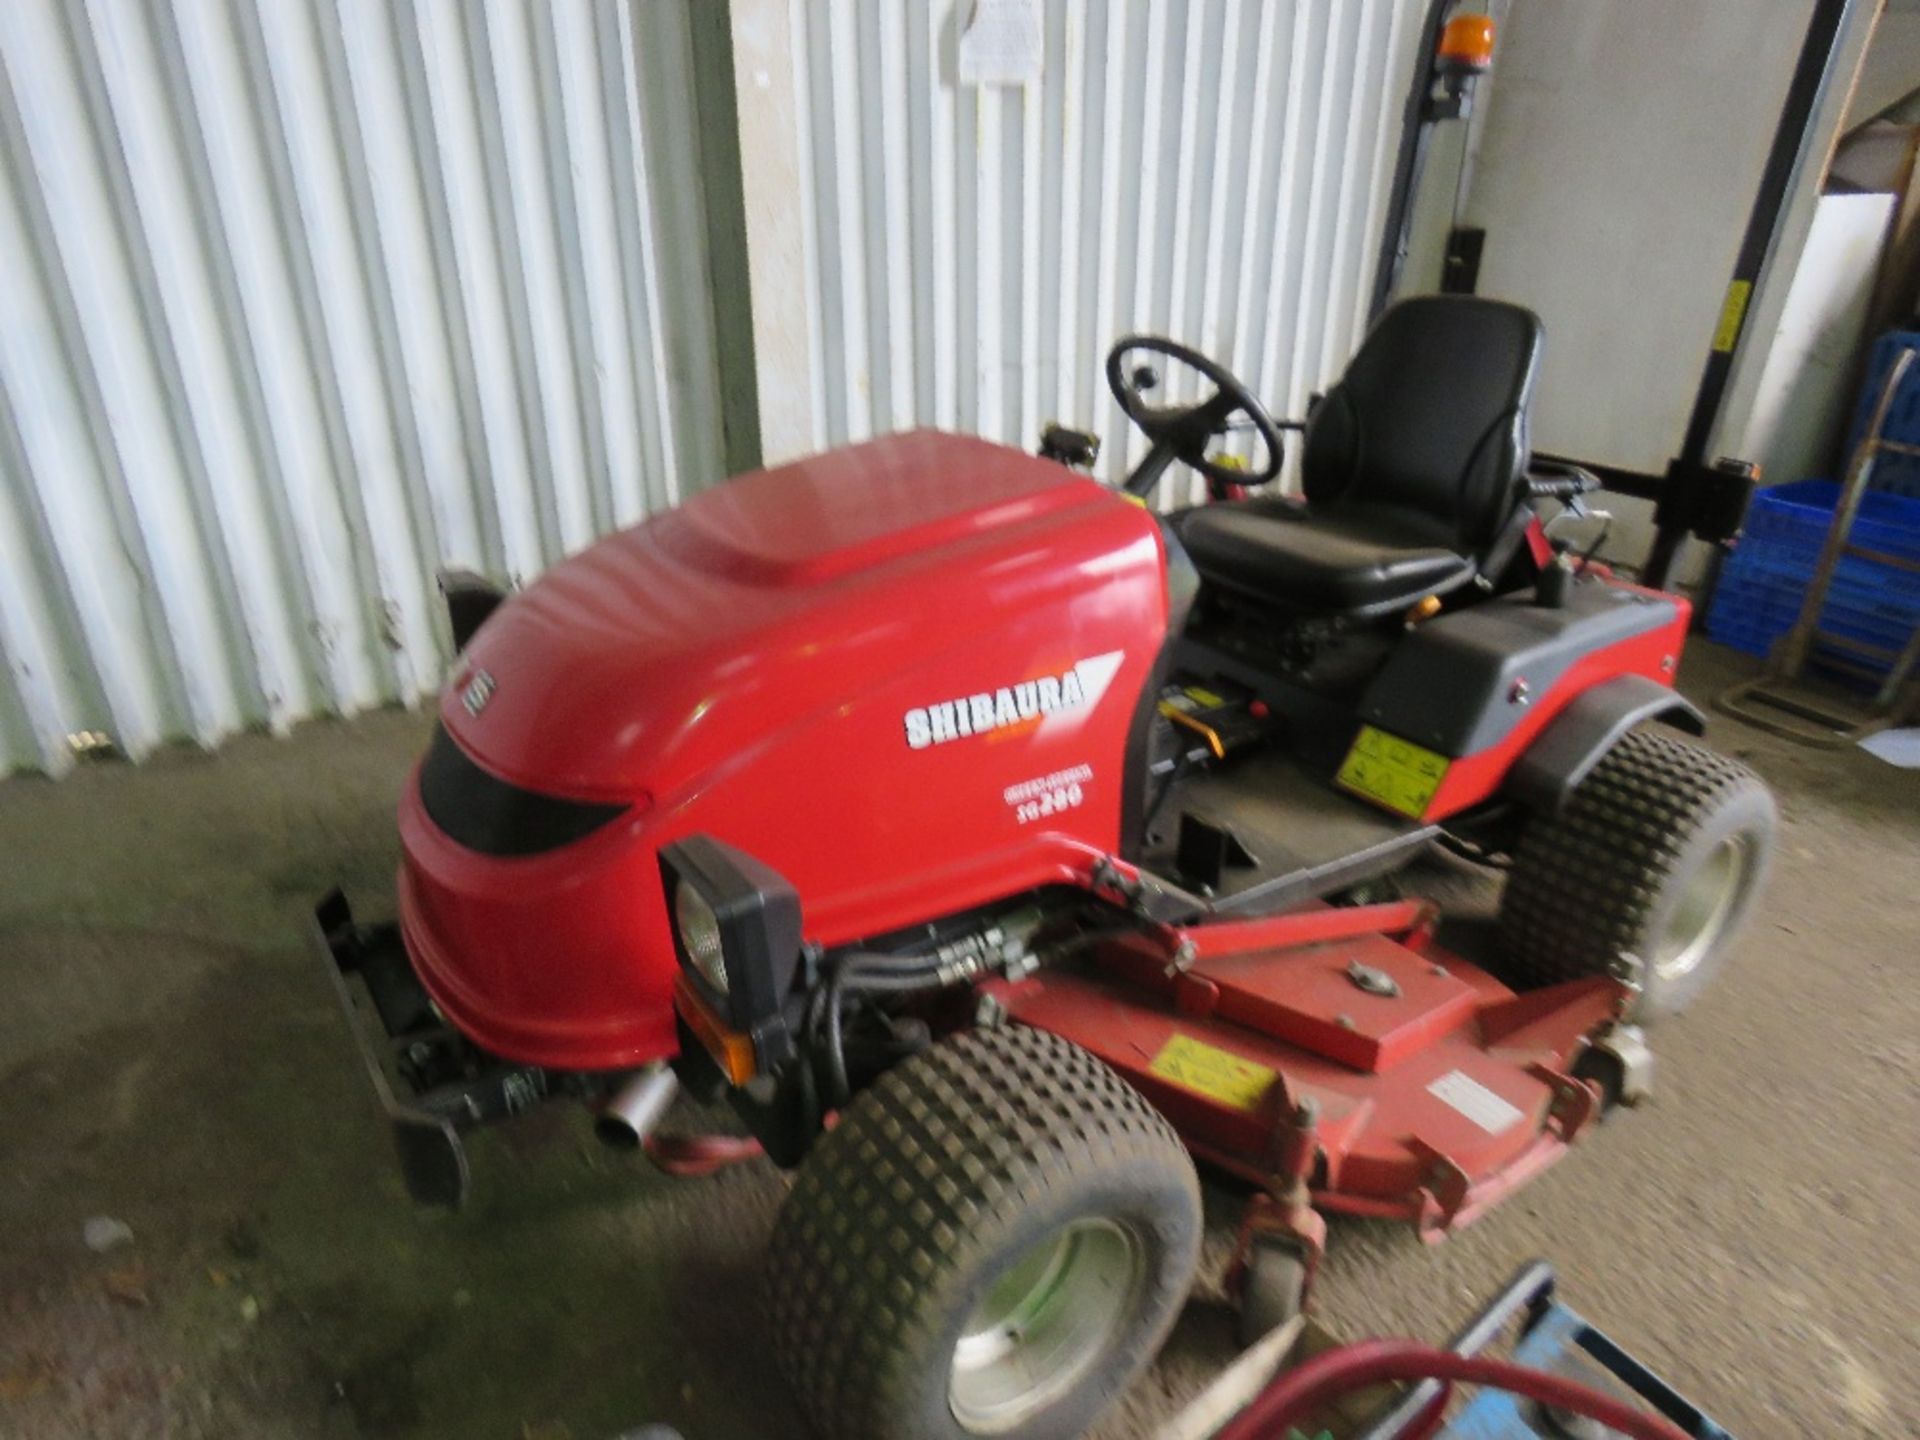 SHIBAURA SG280 GREEN SPECIAL RIDE ON MOWER WITH 5FT CUTTING DECK. 342 REC HOURS. REG:NK18 BJO WITH V - Bild 3 aus 10